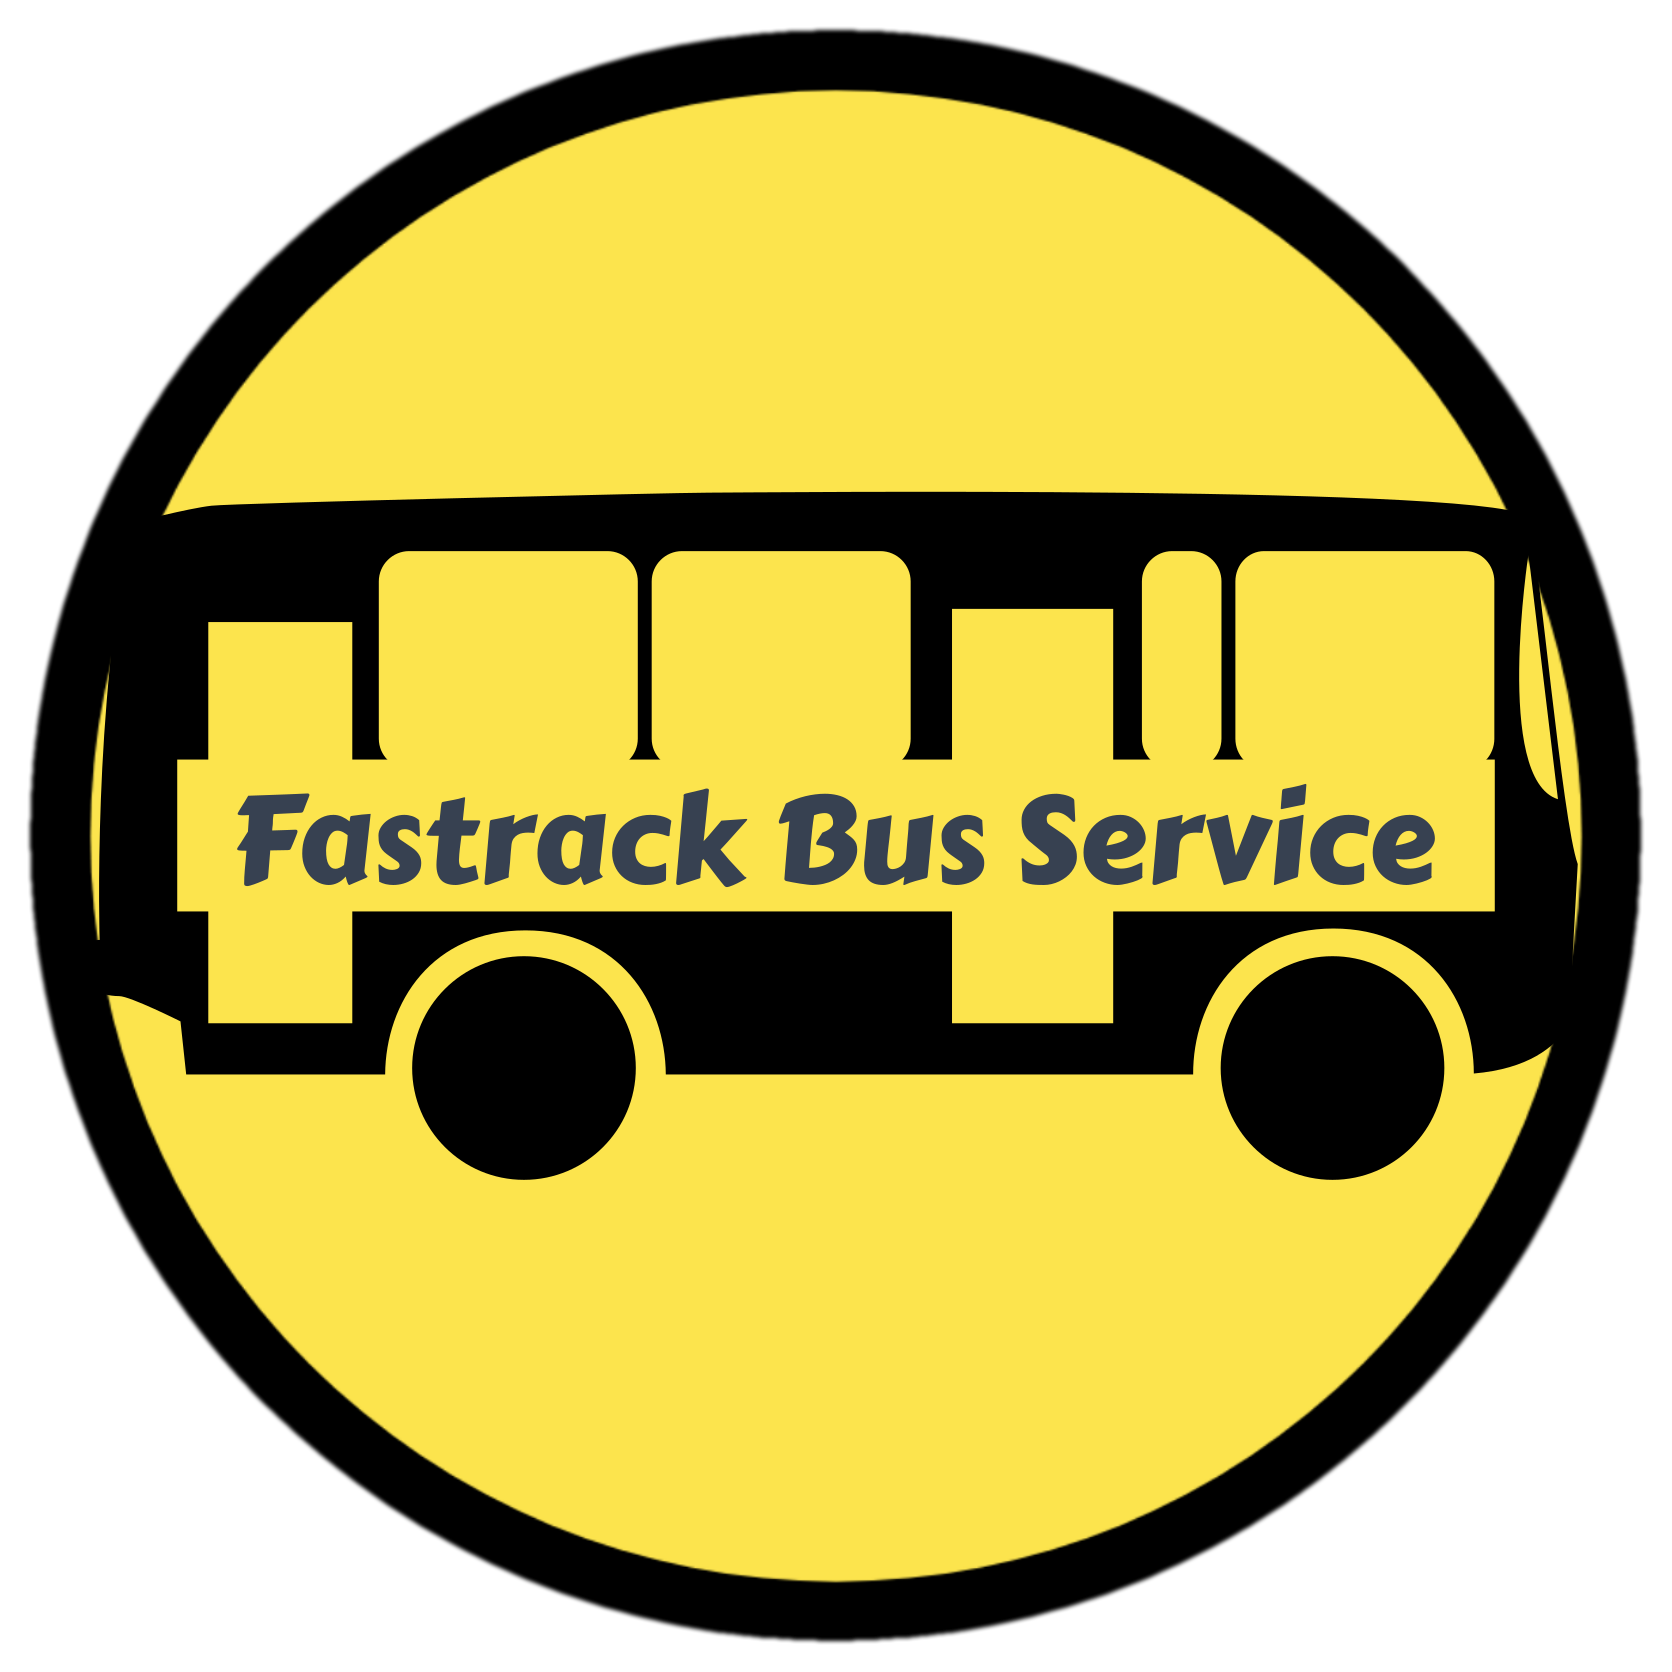 fastrack-bus-service-logo.png